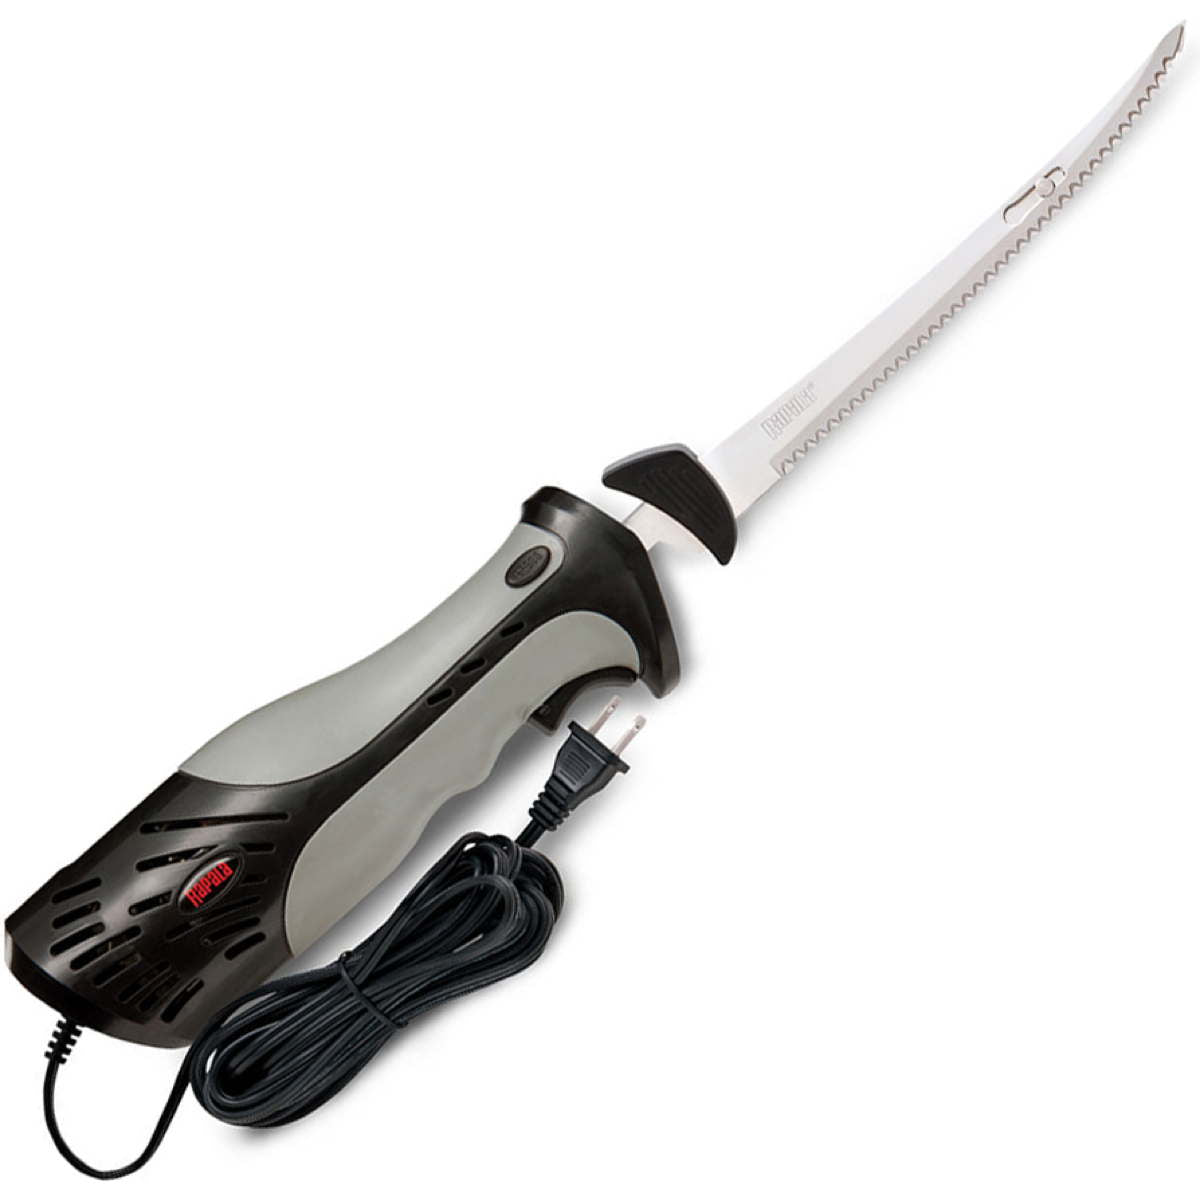 Photo of Rapala Heavy Duty Electric Fillet Knife for sale at United Tackle Shops.